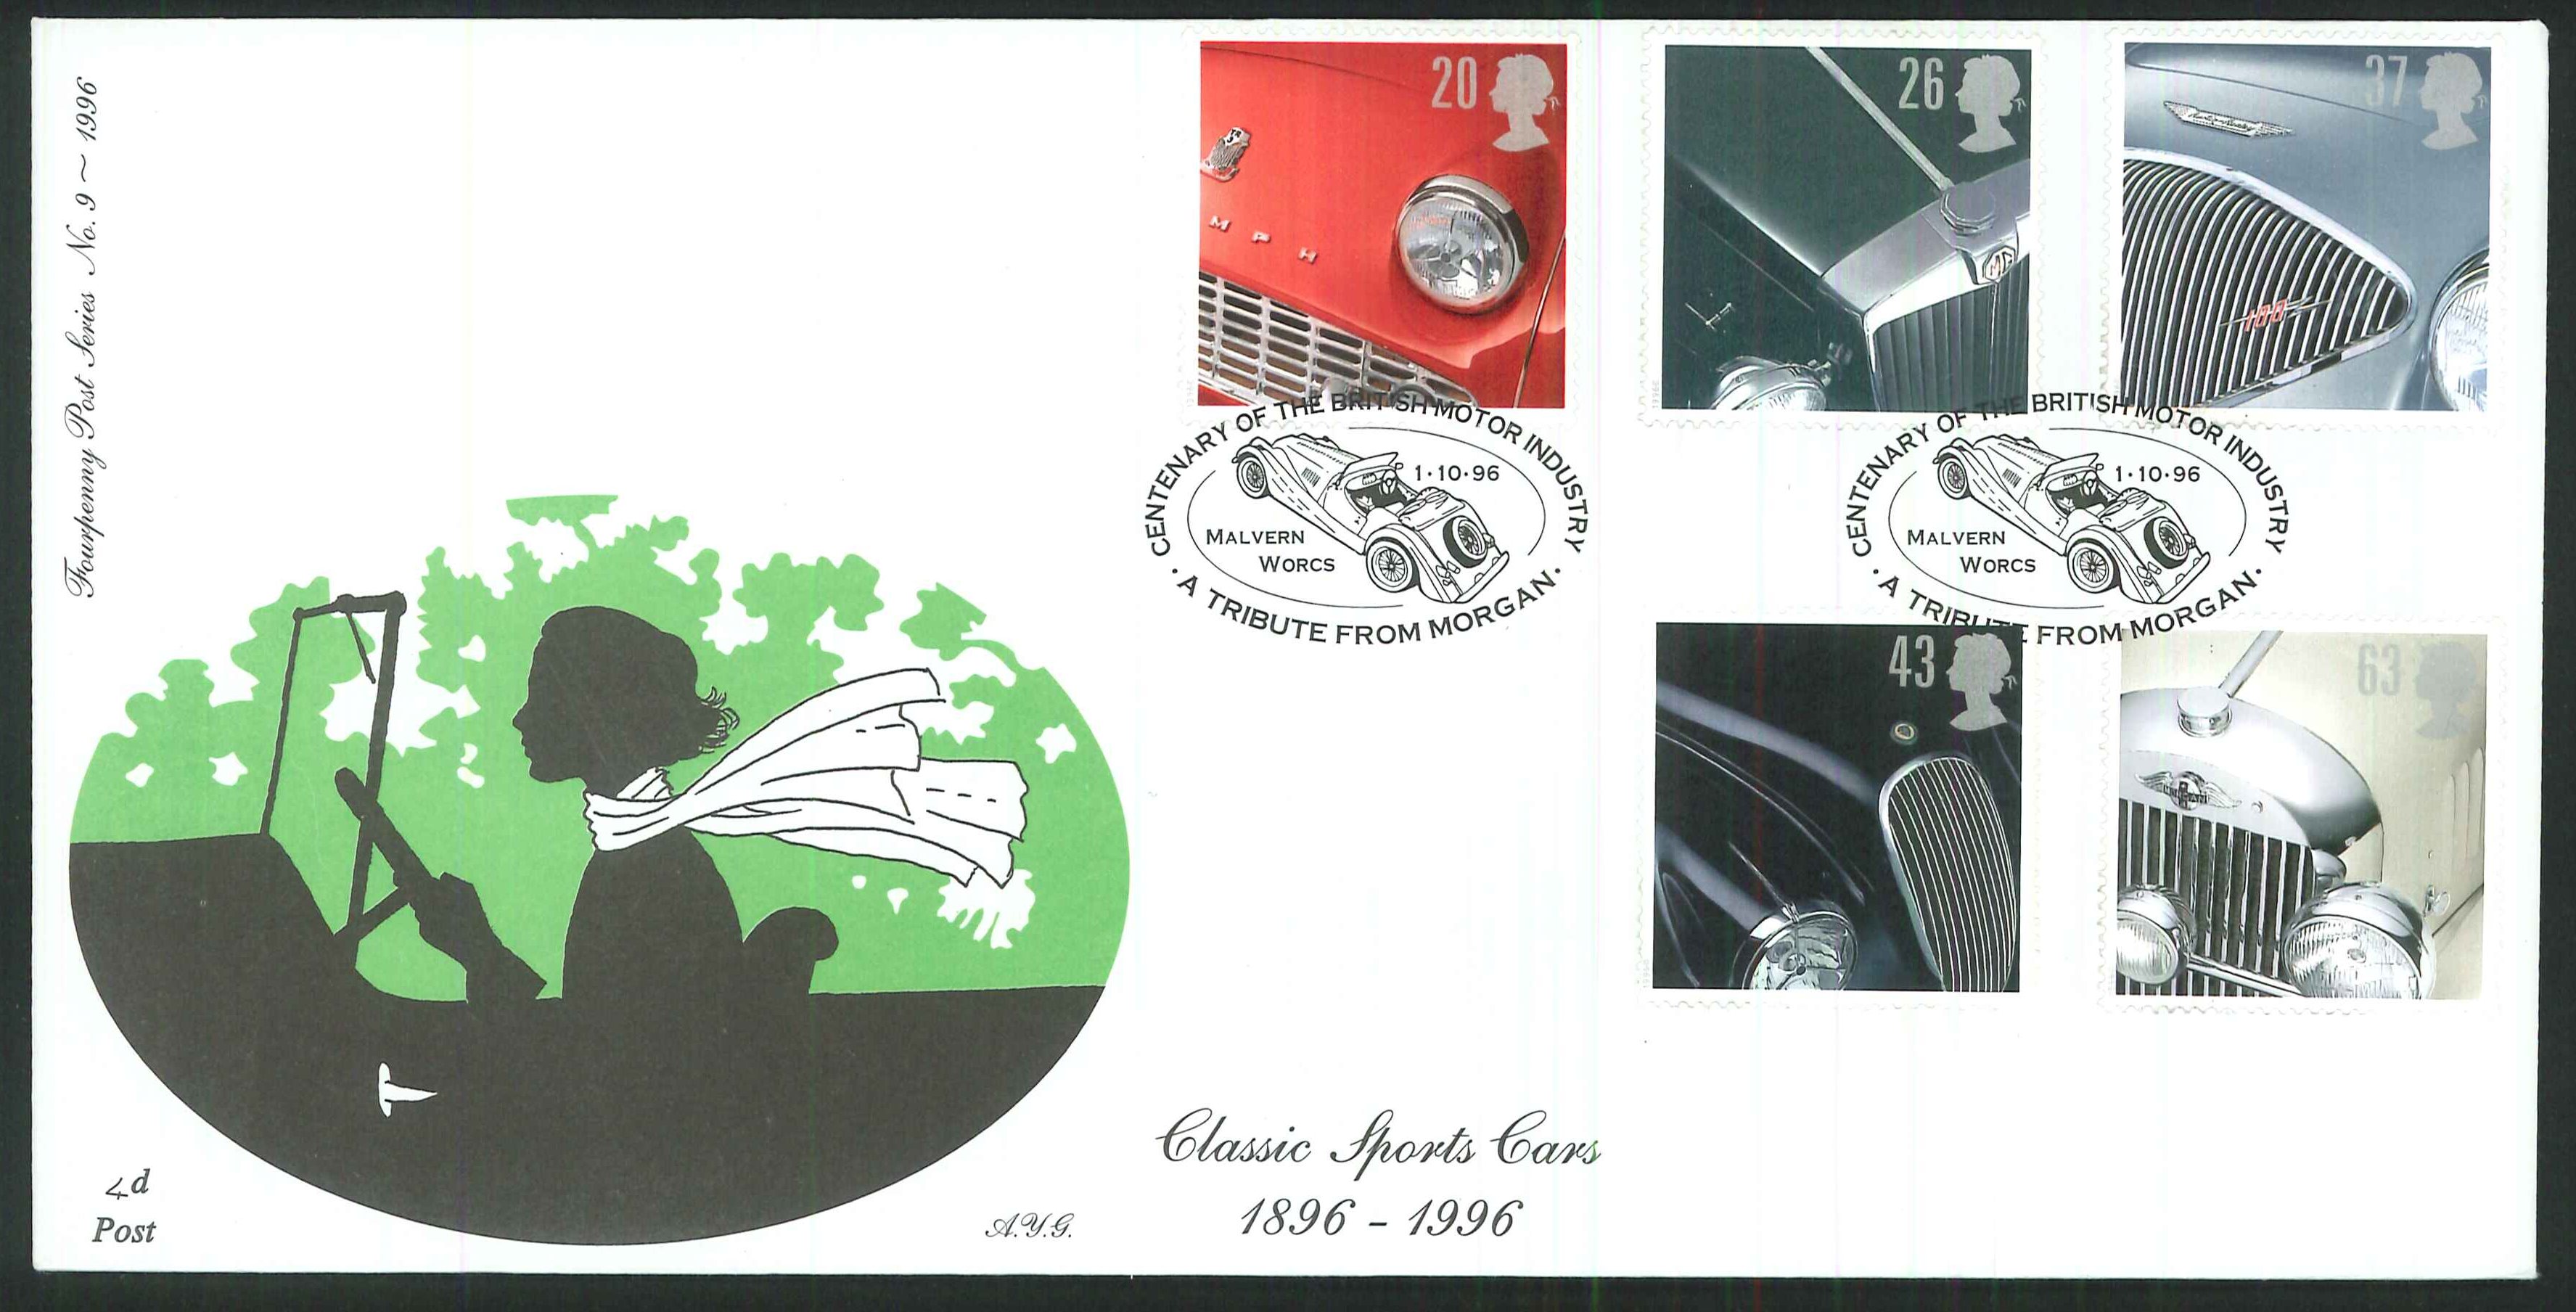 1996 - Classic Sports Cars 1896 - 1996, First Day Cover - Malvern, Worcestershire Postmark